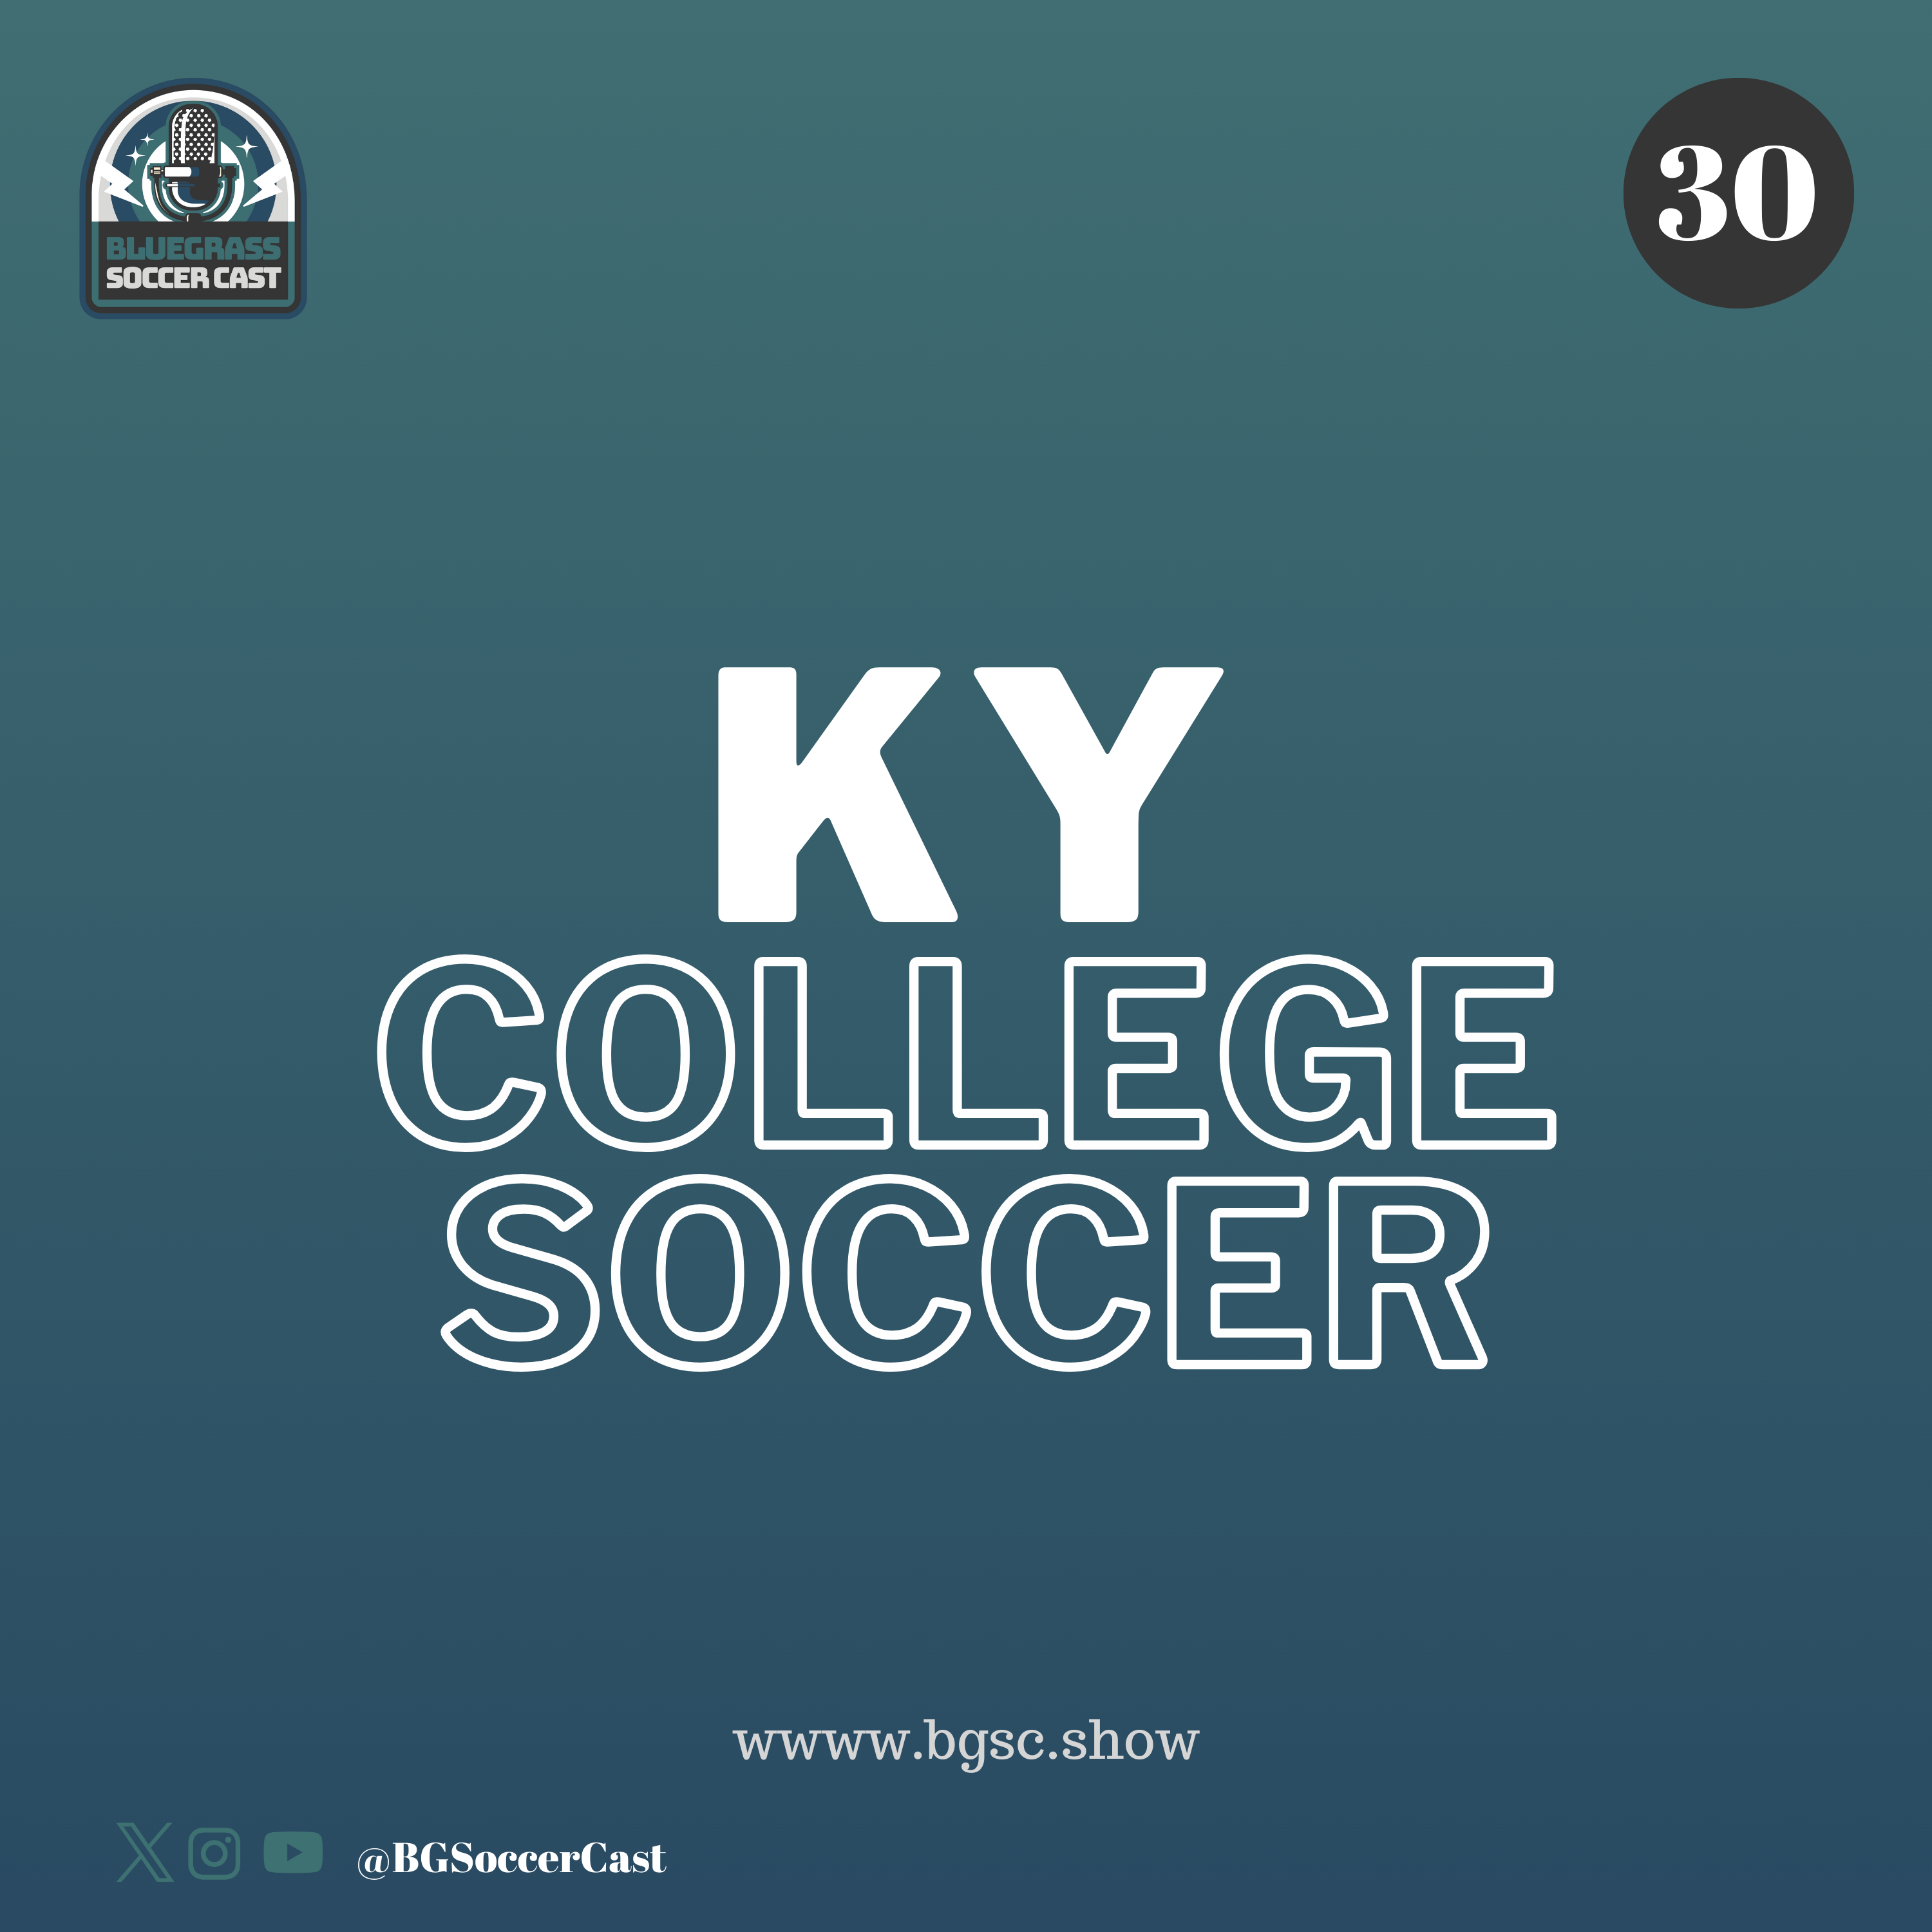 Lower Kentucky College Soccer Report: Opening Week Score Highlights – August 14th to August 20th